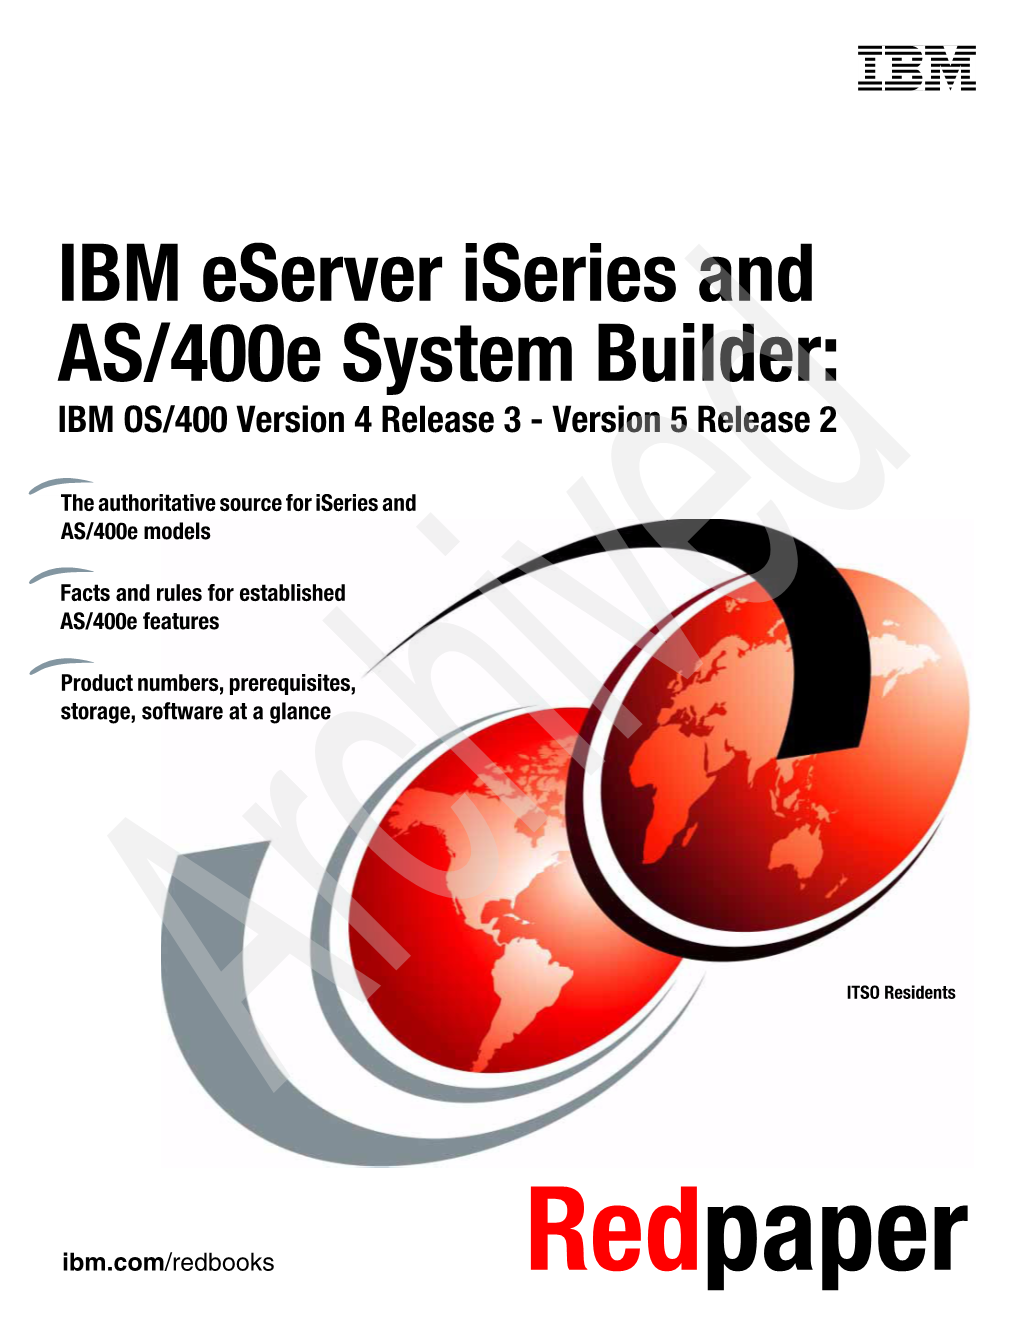 Iseries and AS/400E System Builder: IBM OS/400 Version 4 Release 3 - Version 5 Release 2